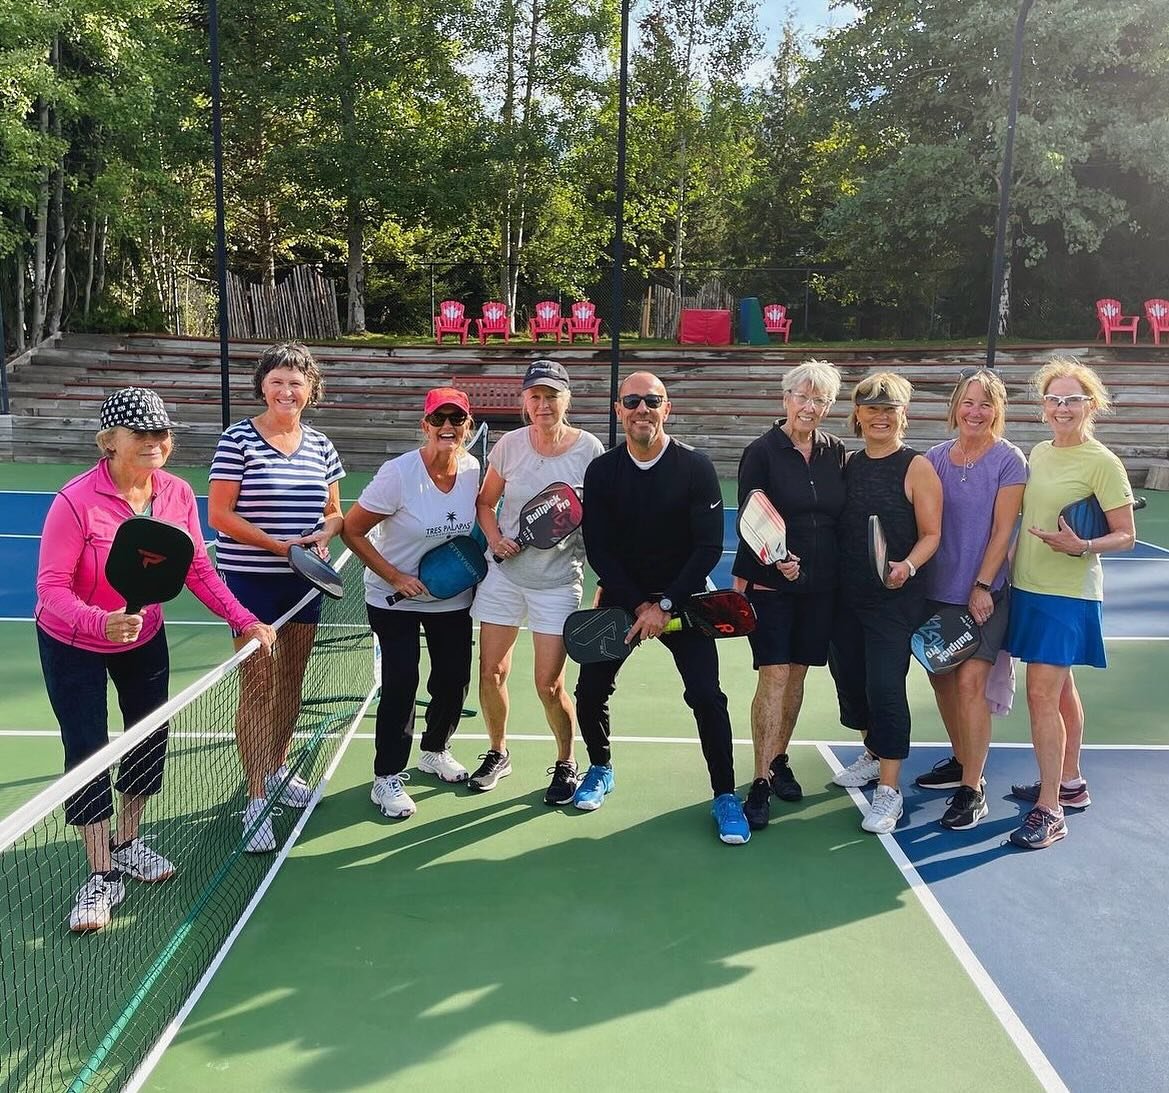 ➡️AVAILABLE SPOTS IN THE UPCOMING PICKLEBALL 101 SESSIONS!⬅️

Our renowned Pickleball 101 classes are the best introduction to the current fastest-growing sport in North America!🇨🇦🏓

🗓️DATES:
&bull; Every Friday @ 10-11:30am starting on April 12t